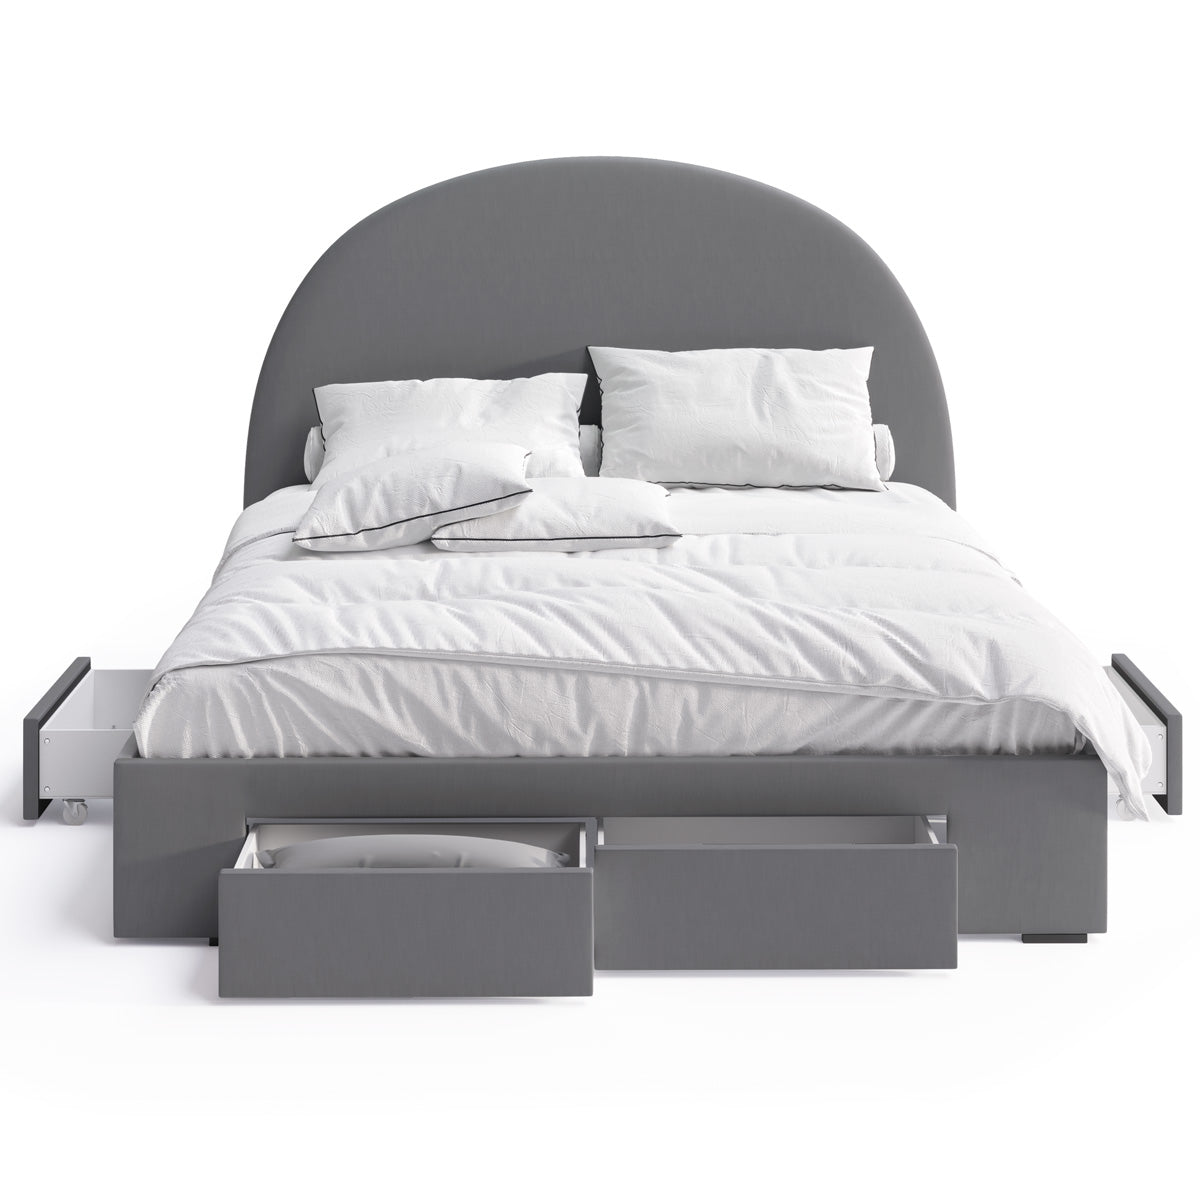 Arch Bed Frame with Four Storage Drawers (Charcoal Fabric)